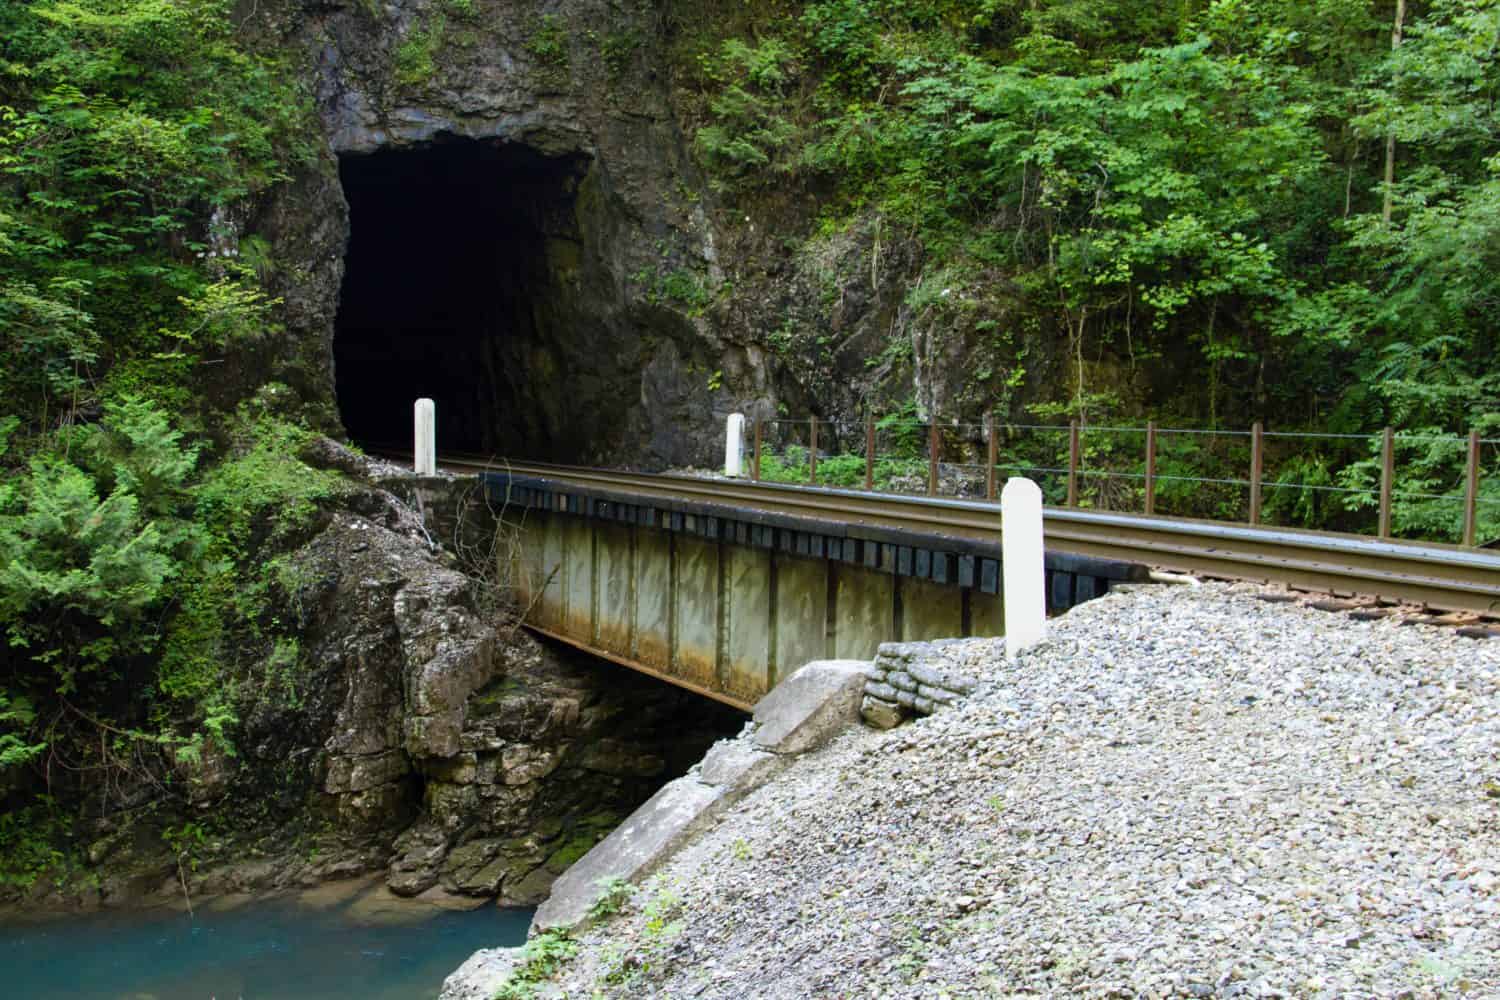 Natural Tunnel railroad tunnel is the namesake and centerpiece of the Natural Tunnel State Park in state of Virginia.